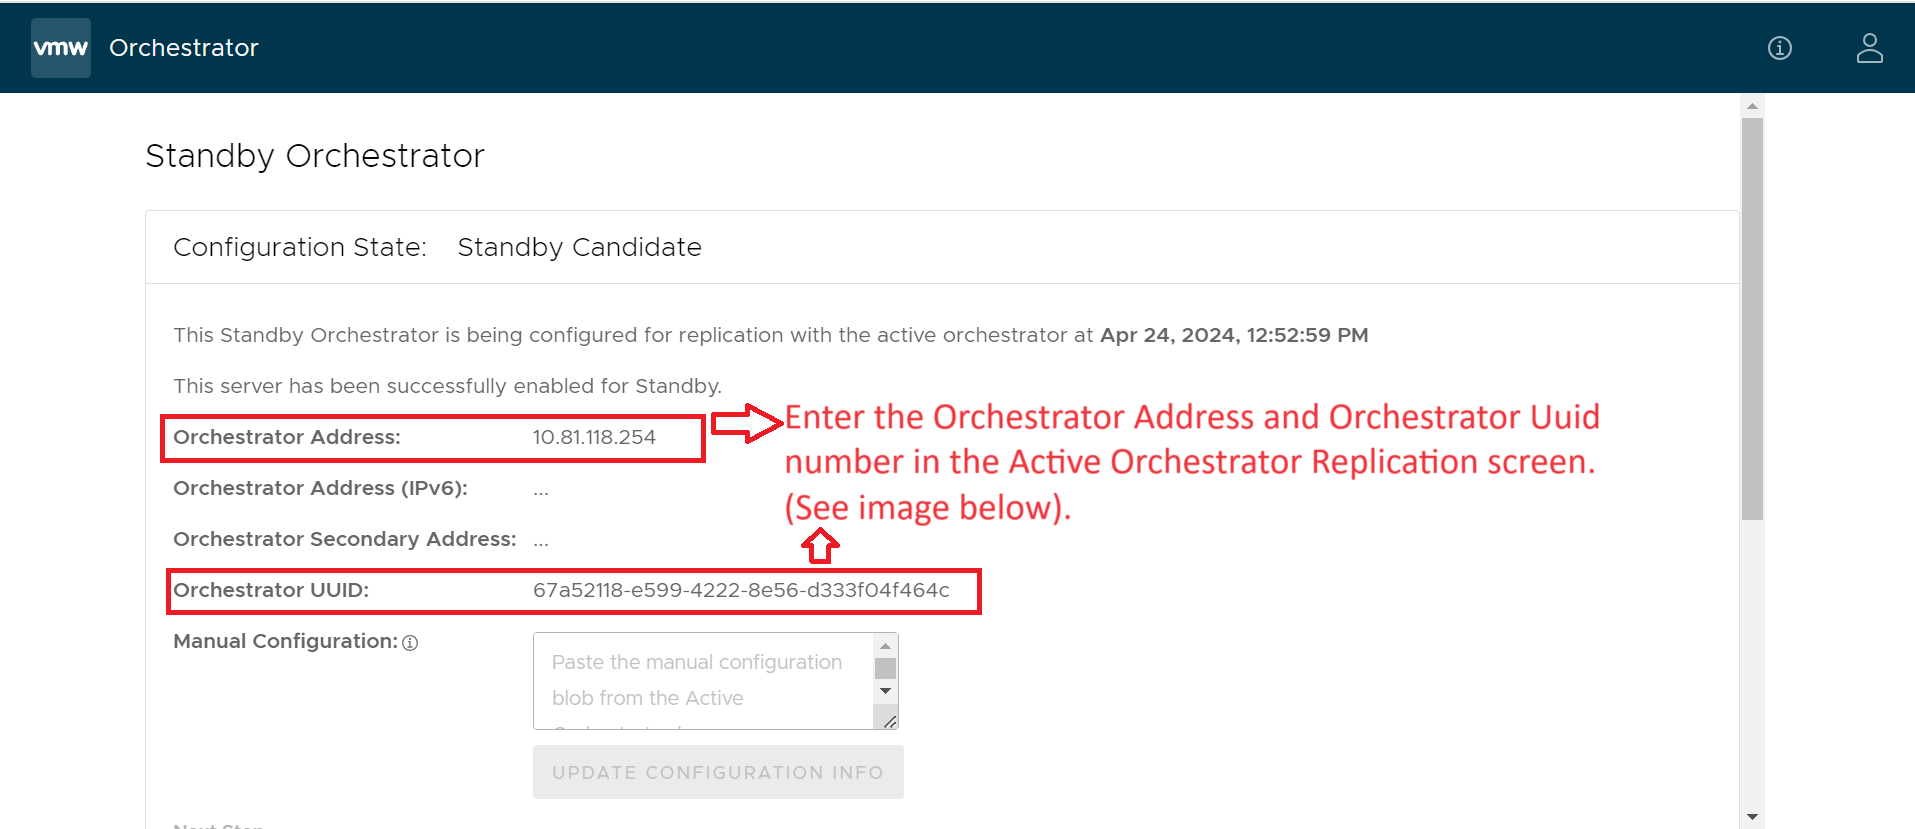 The Orchestrator Address and the Orchestrator Uuid number are required to activate the Active Orchestrator.